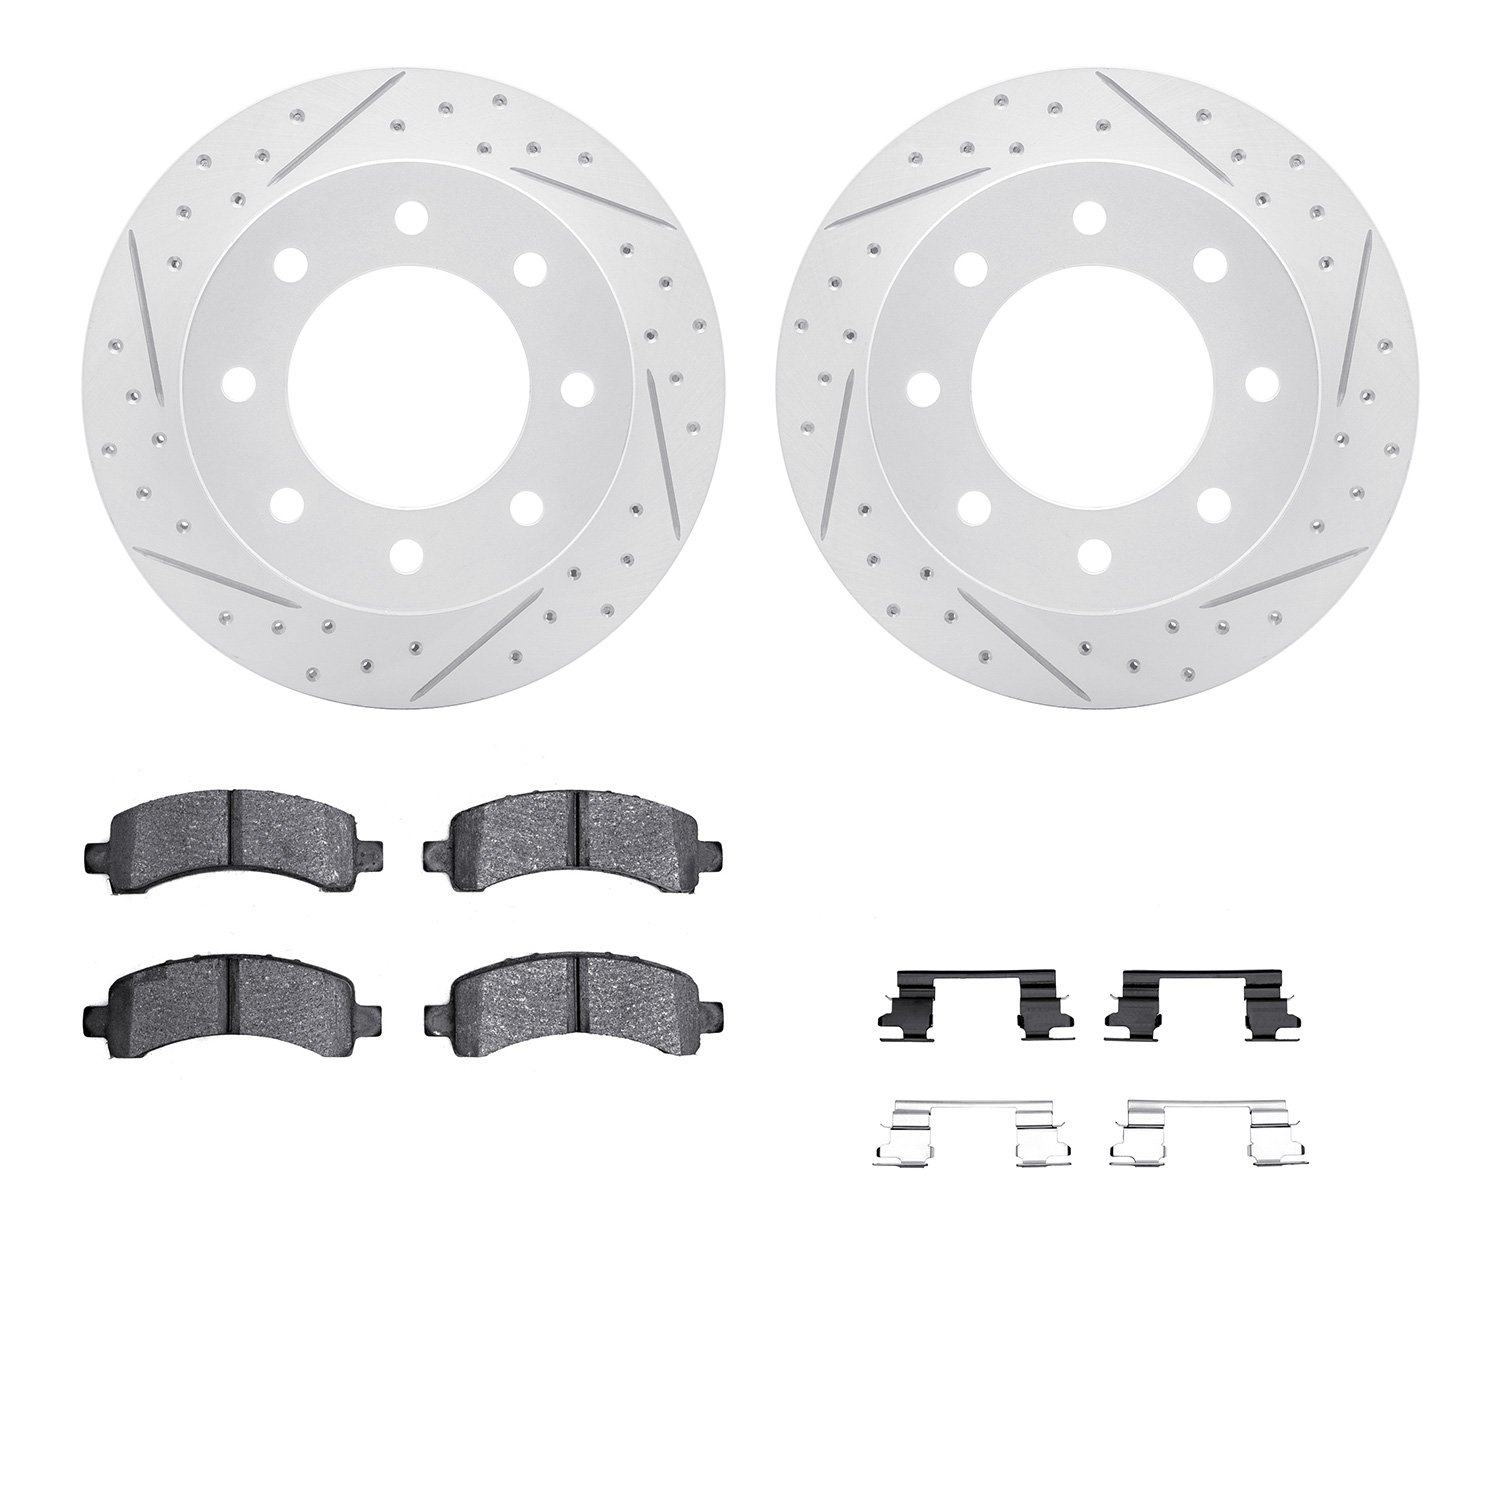 2512-48029 Geoperformance Drilled/Slotted Rotors w/5000 Advanced Brake Pads Kit & Hardware, 2003-2017 GM, Position: Rear